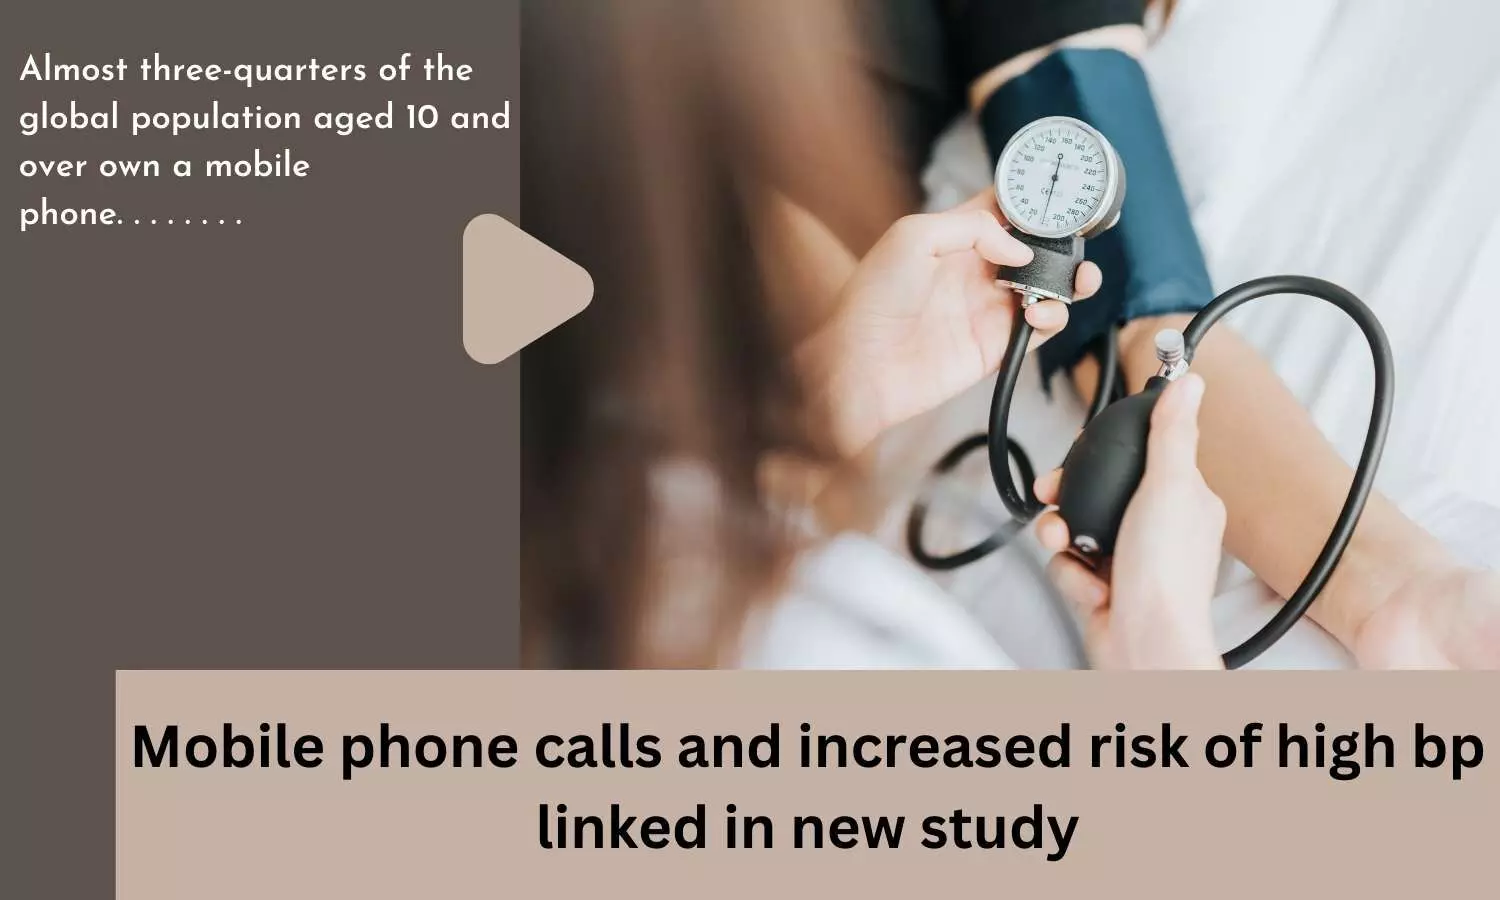 Mobile phone calls and increased risk of high bp linked in new study